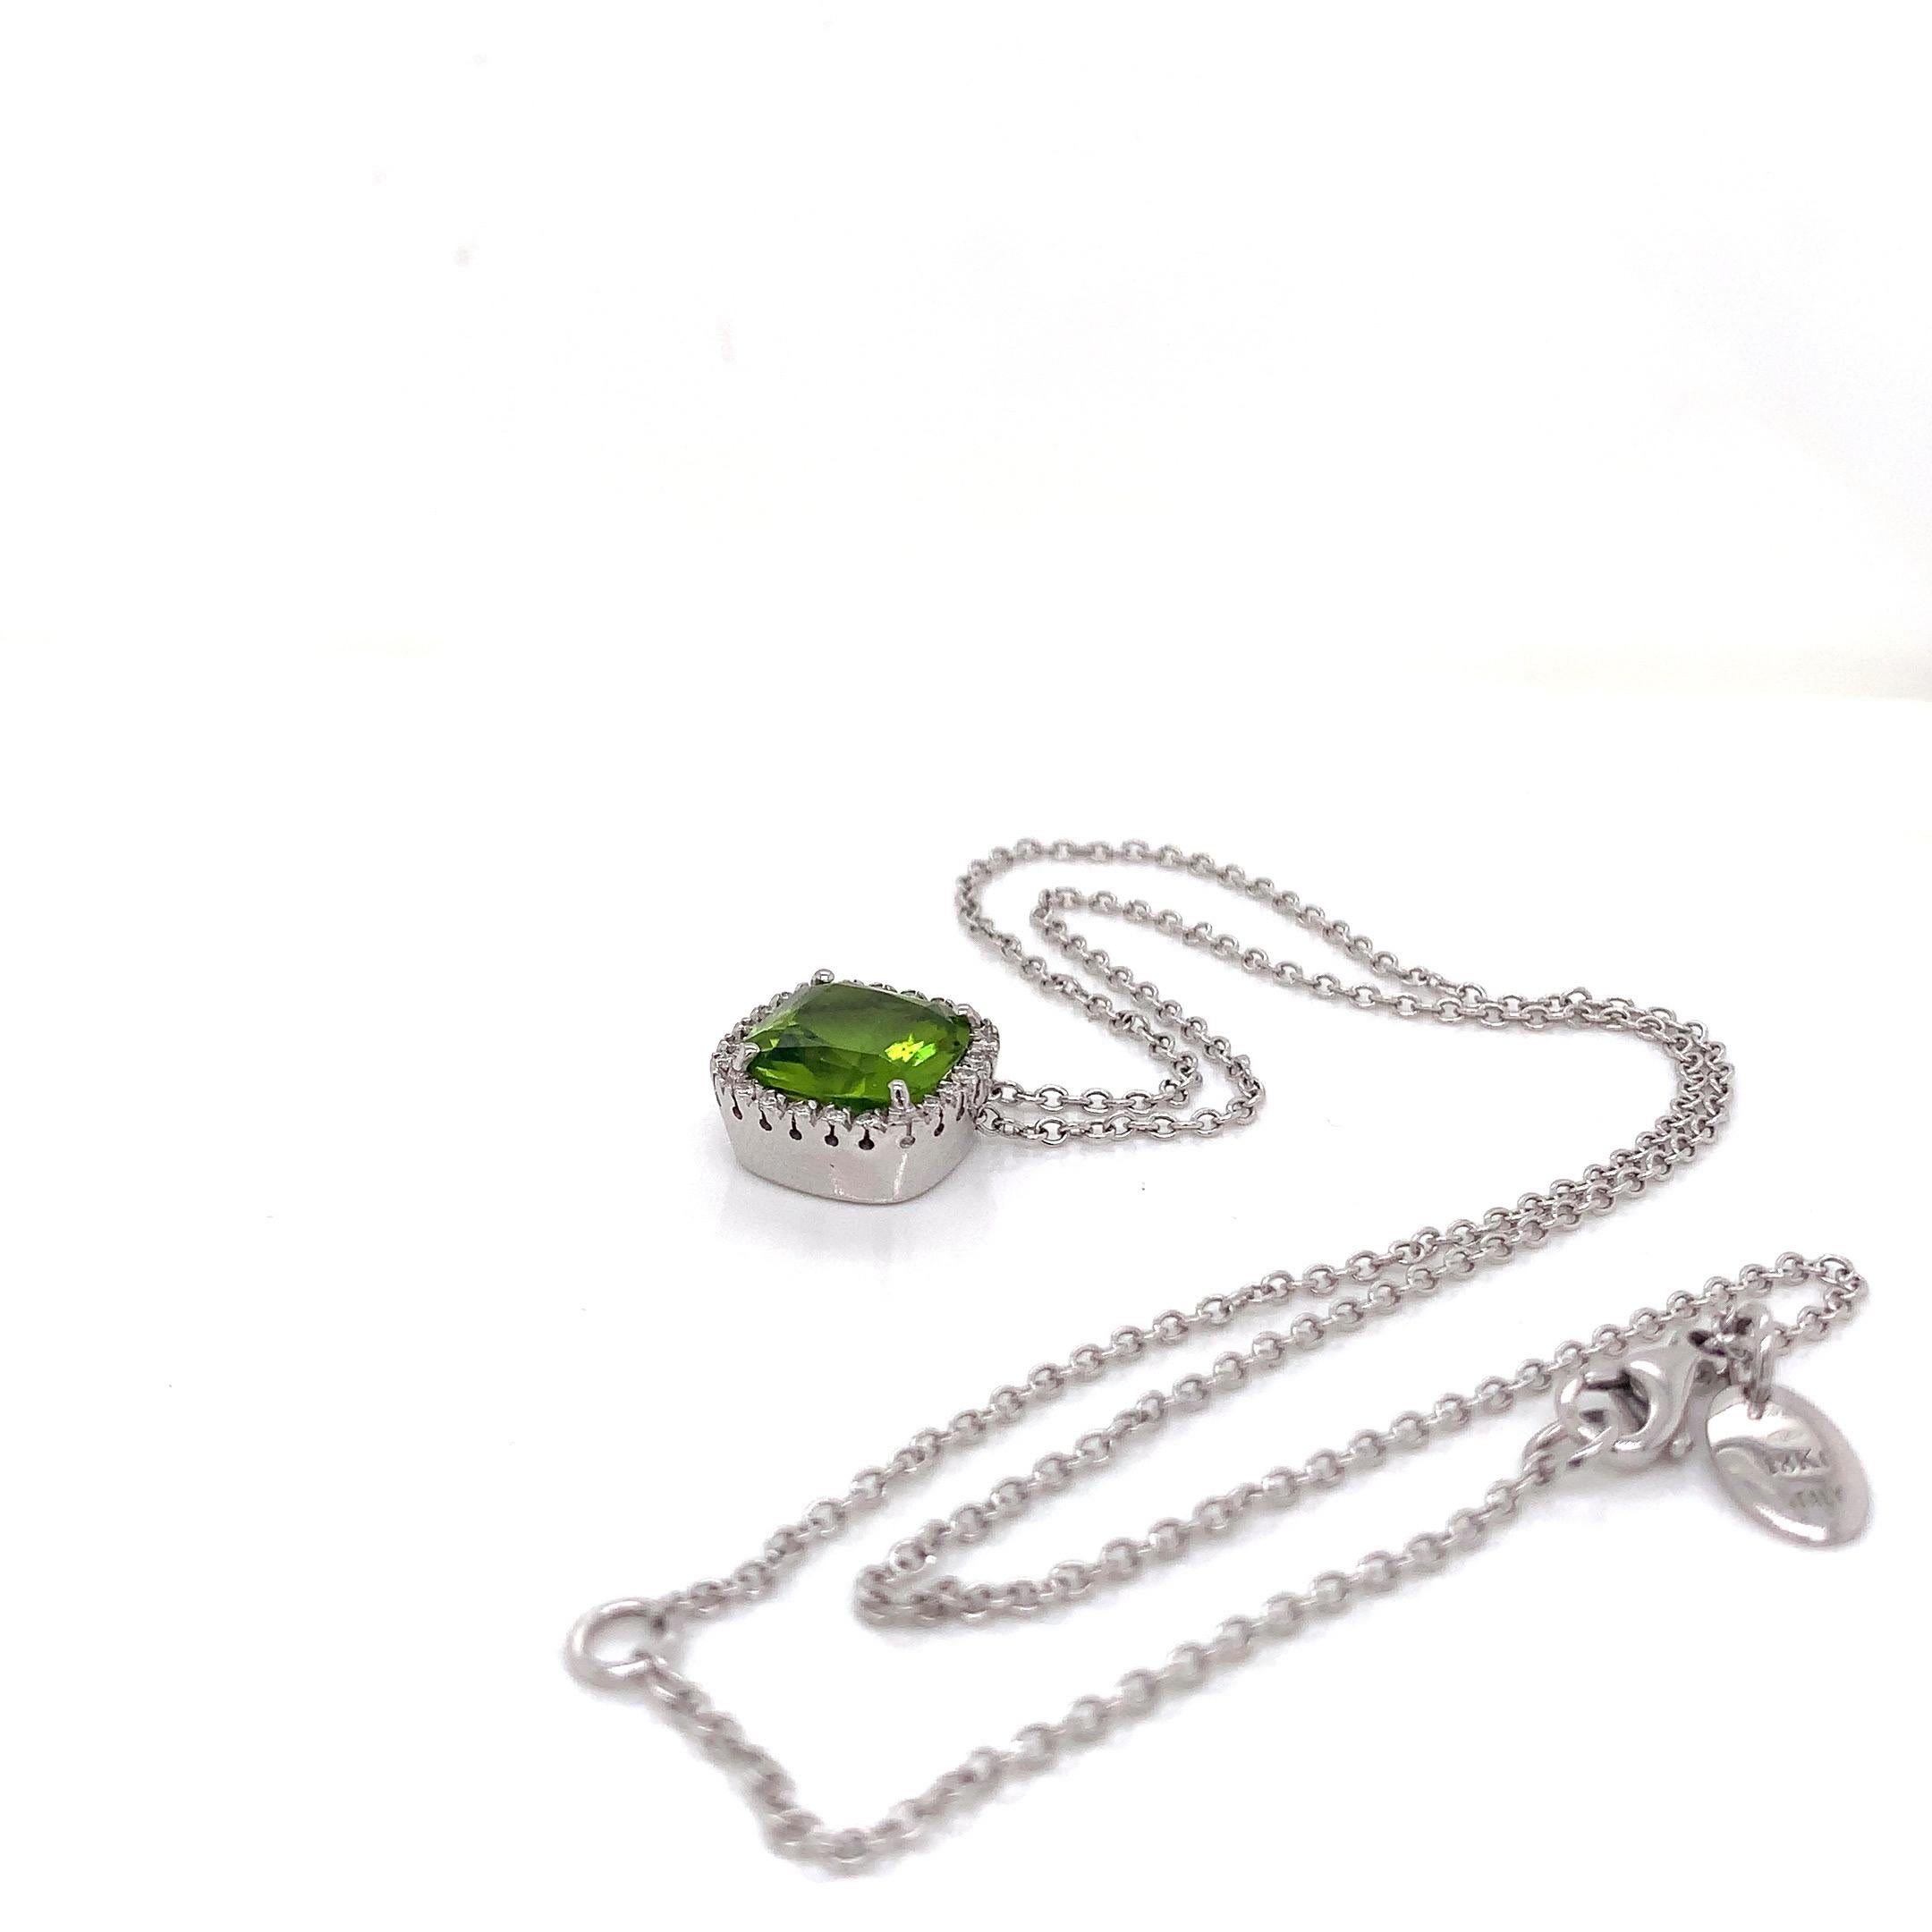 Contemporary 18 Karat White Gold Peridot and Diamond Garavelli Pendant with Necklace For Sale